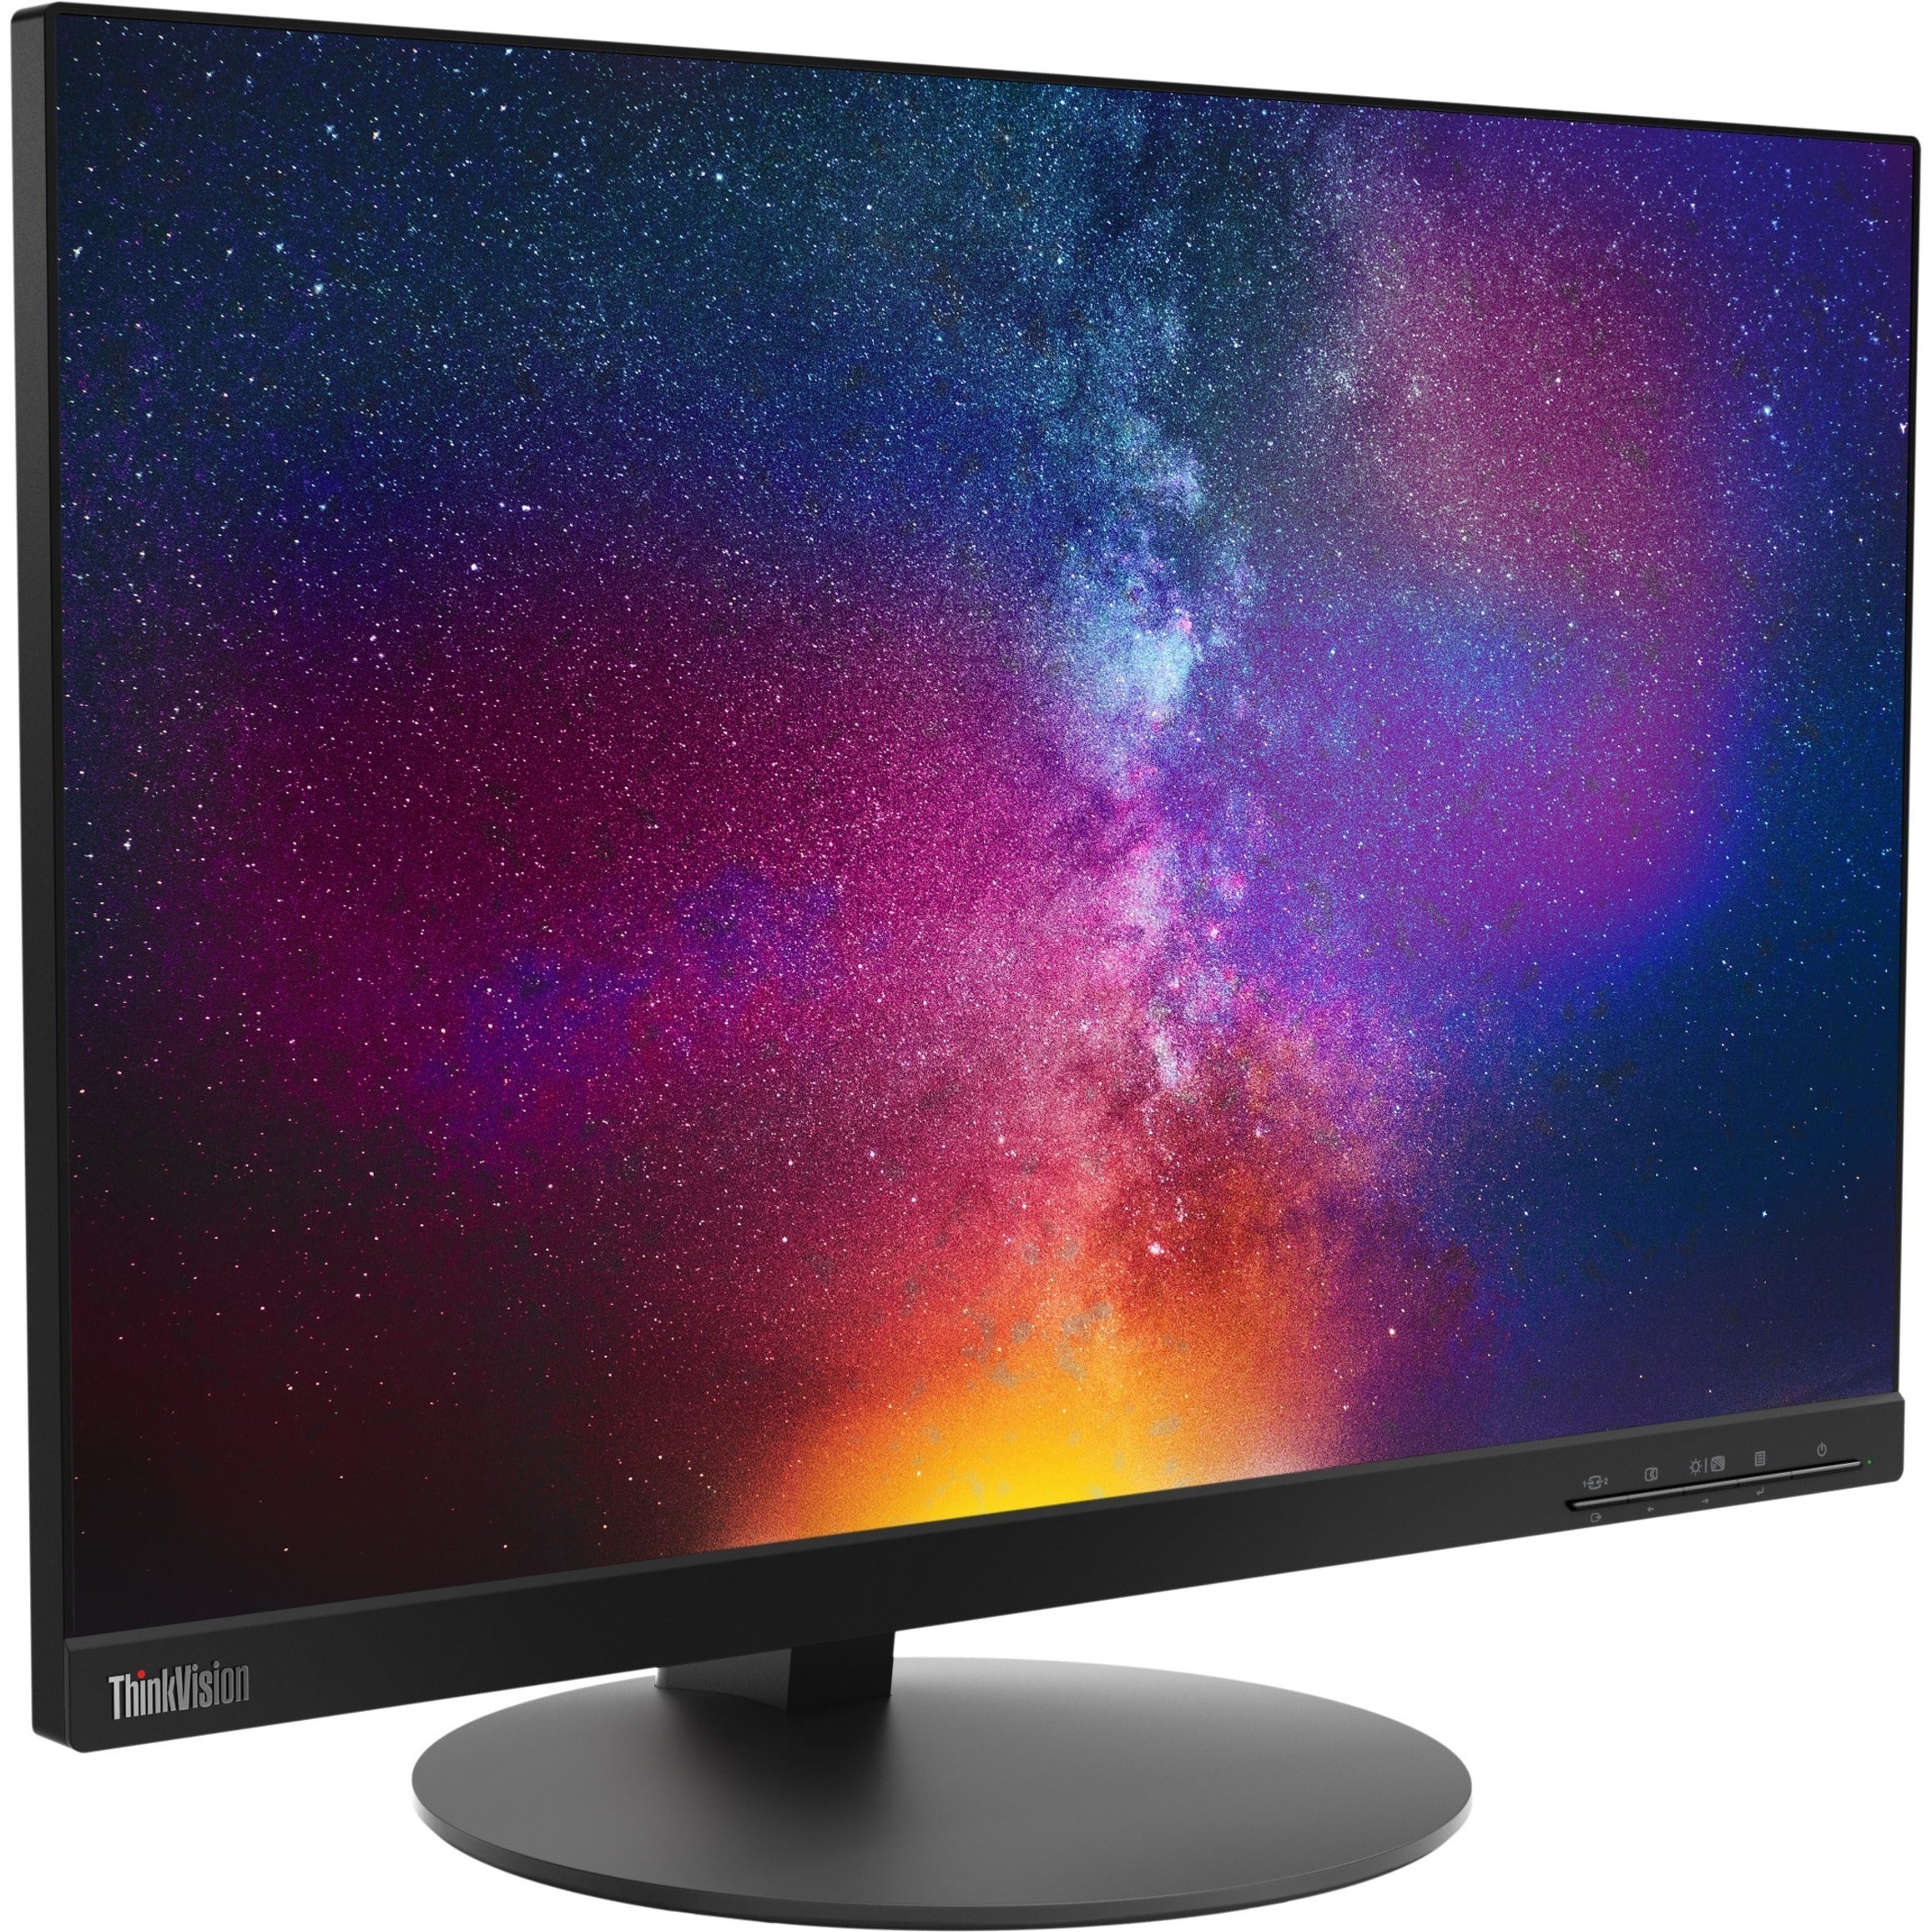 Lenovo ThinkVision T23d Widescreen LCD Monitor - 22.5 Display, 1920x1200 Resolution, HDMI, Black [Discontinued]